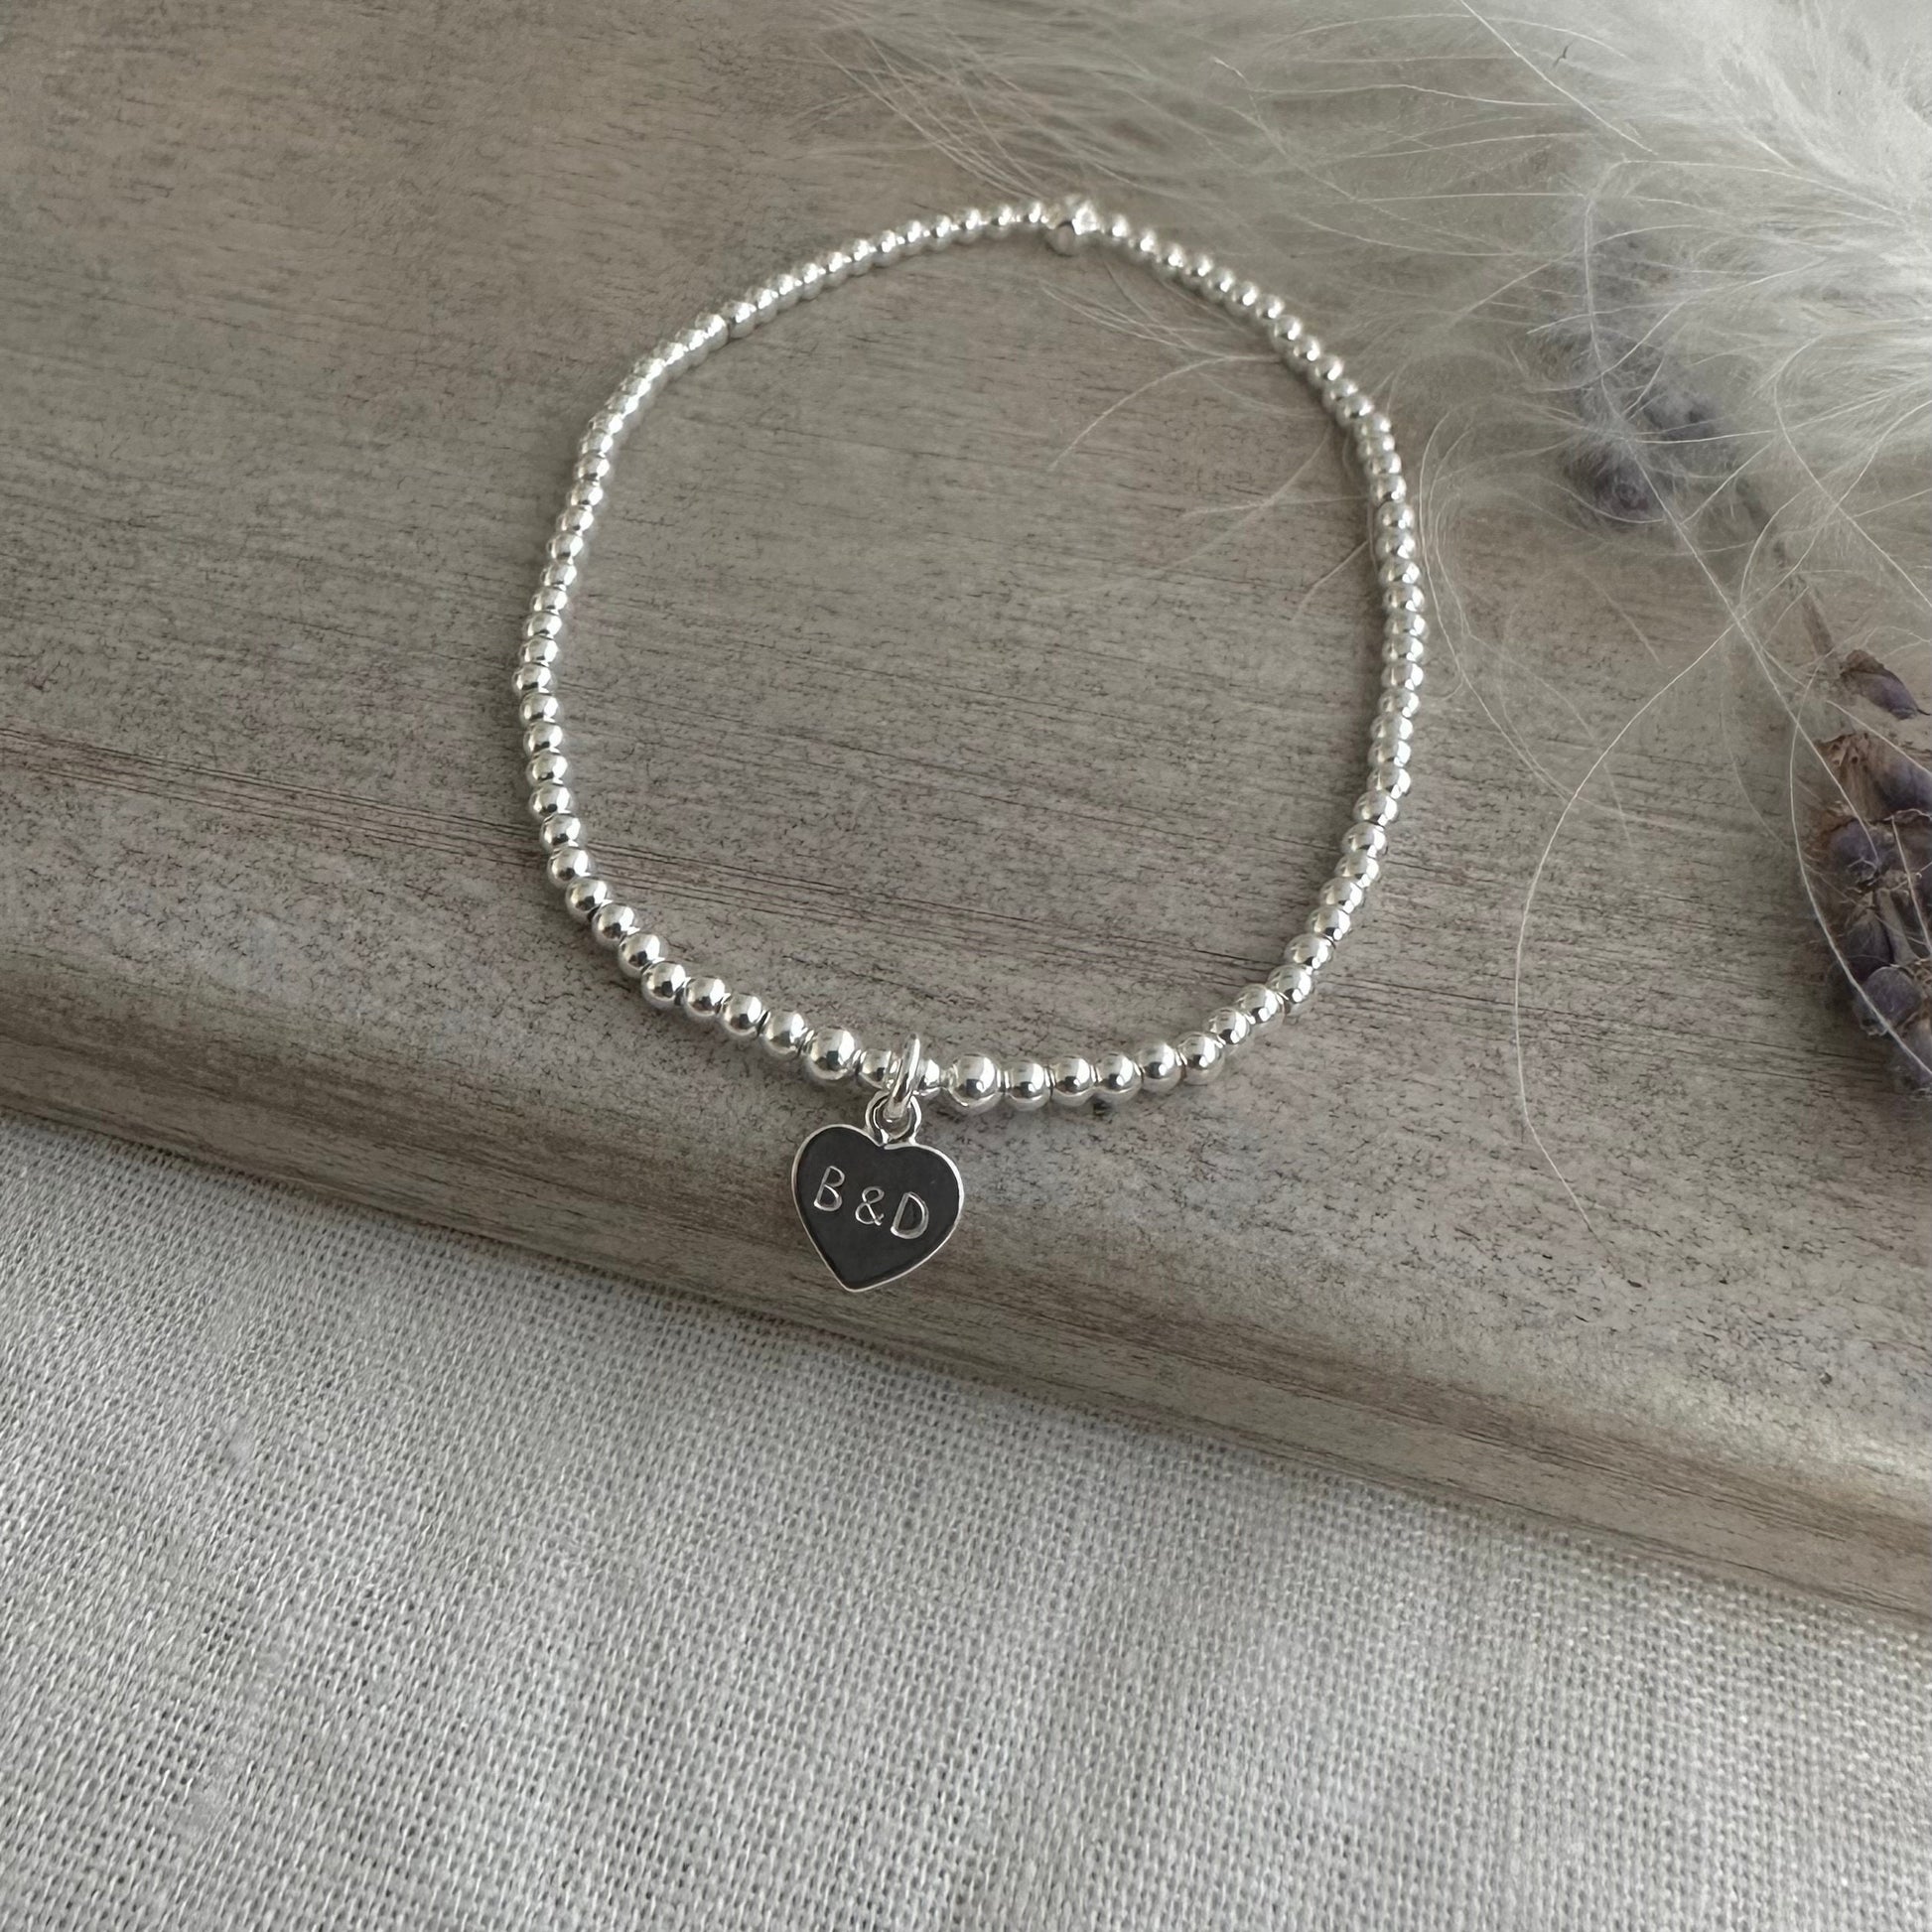 Stretch Couples Initials Charm Bracelet, Dainty Layering Sterling Silver bracelet with heart